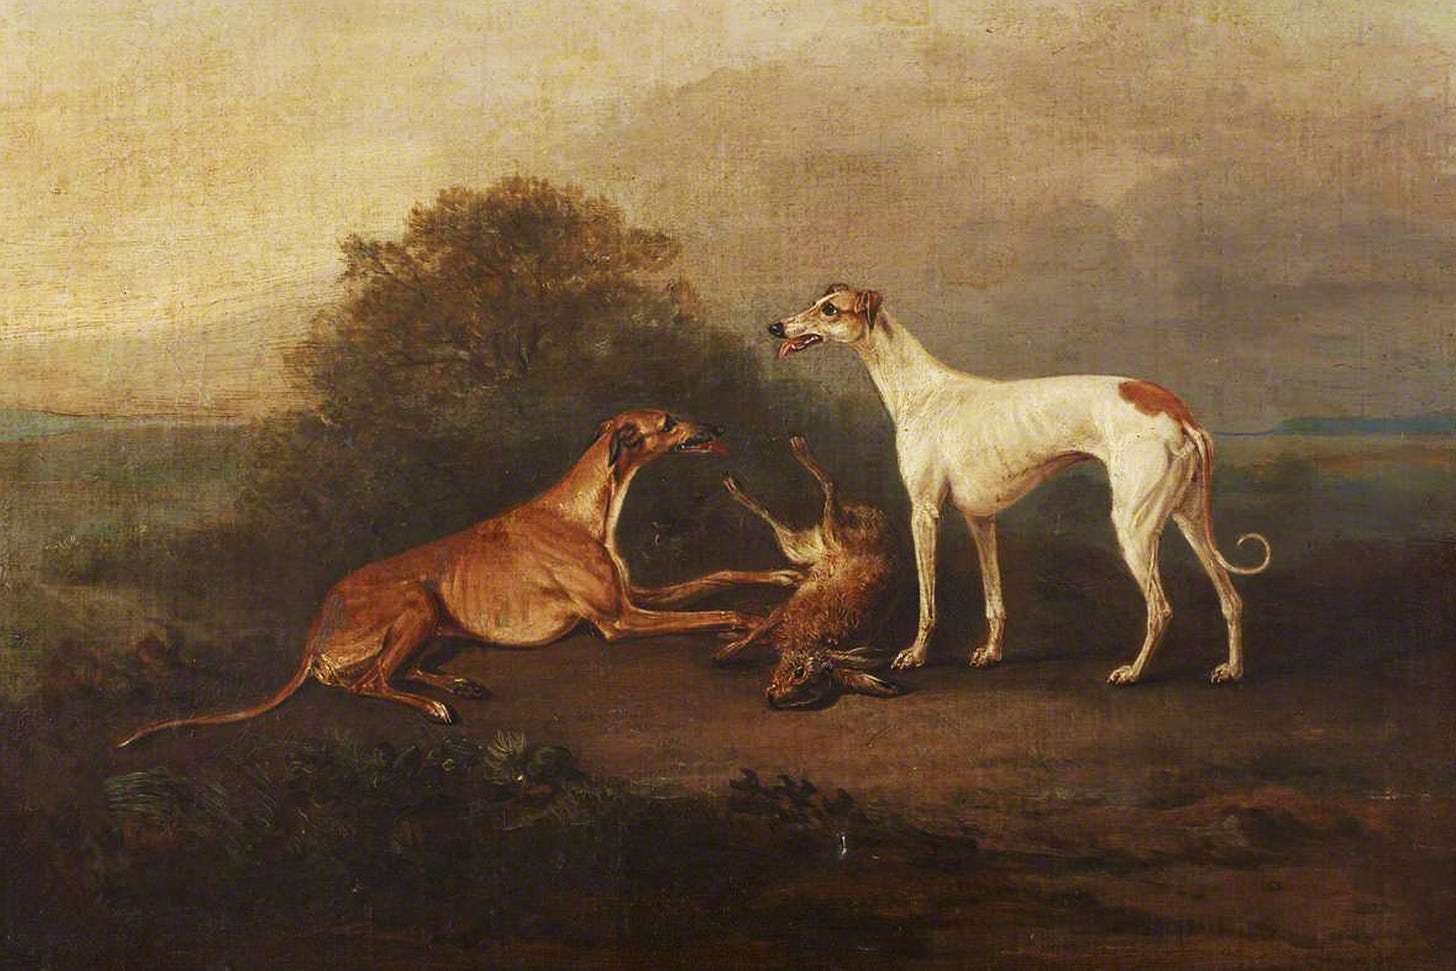 19th century painting of two coursing dogs with a dead hare